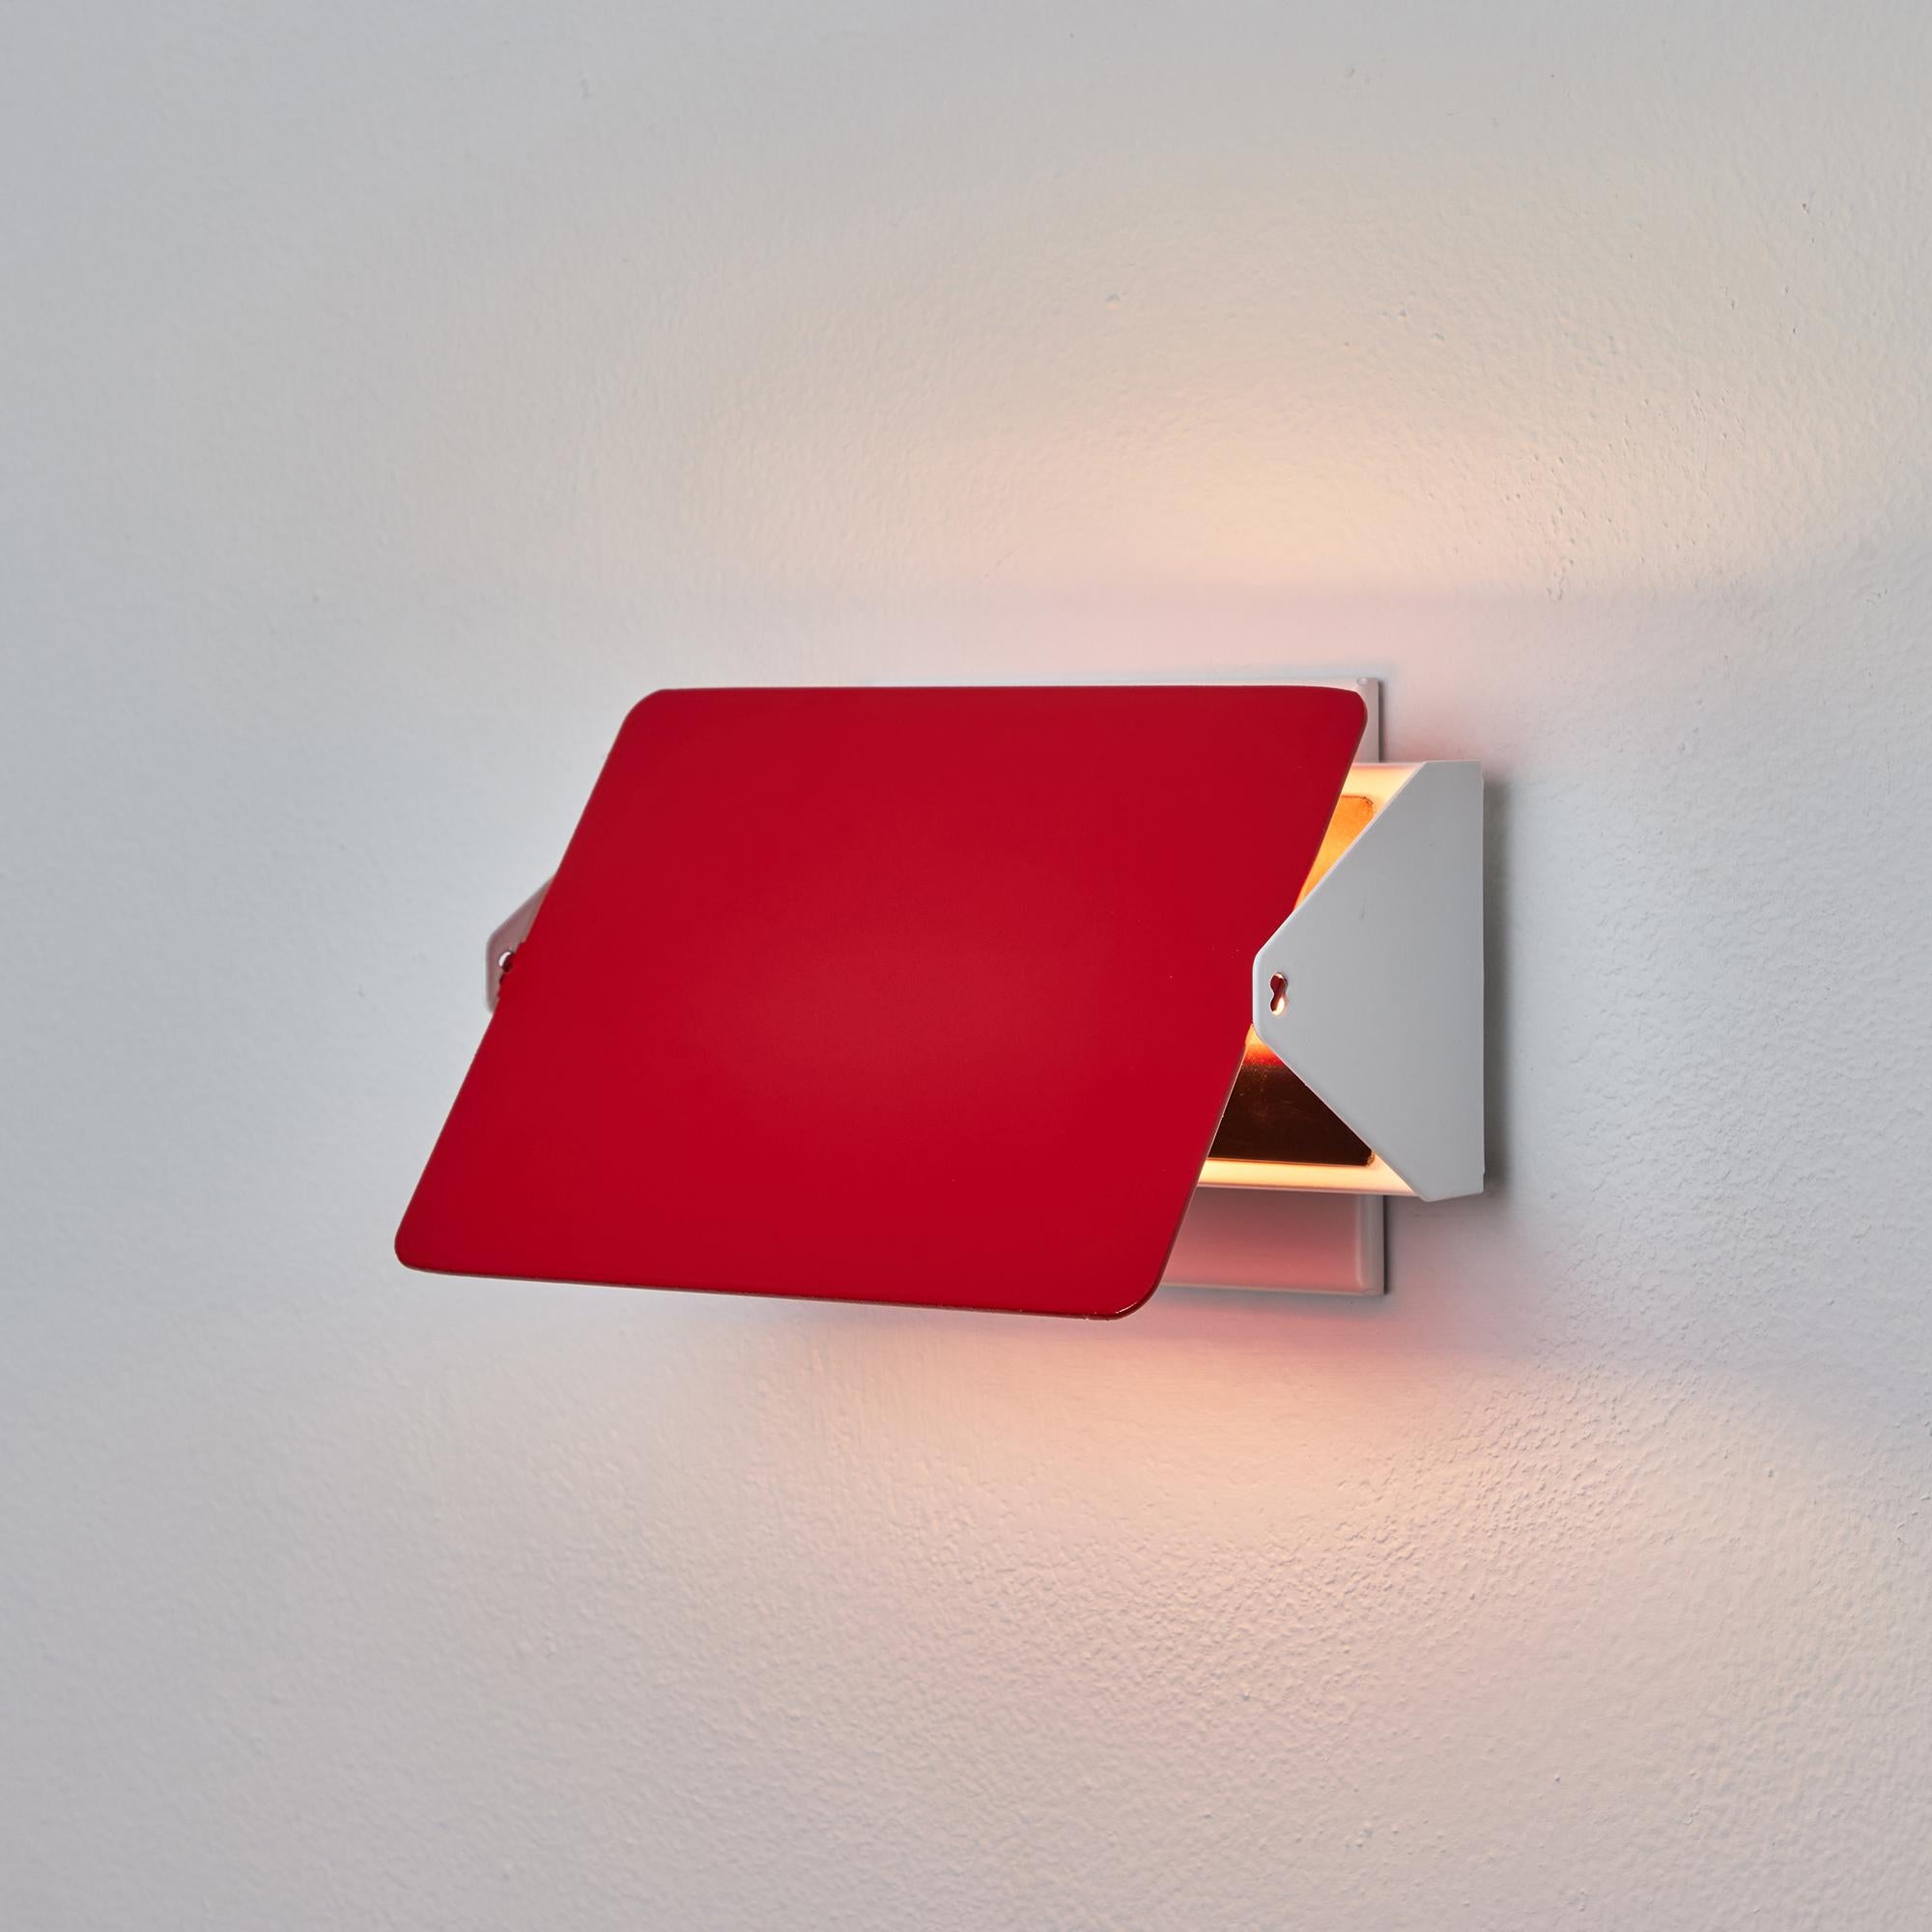 Painted Charlotte Perriand 'Applique à Volet Pivotant' Wall Light in Red for Nemo For Sale